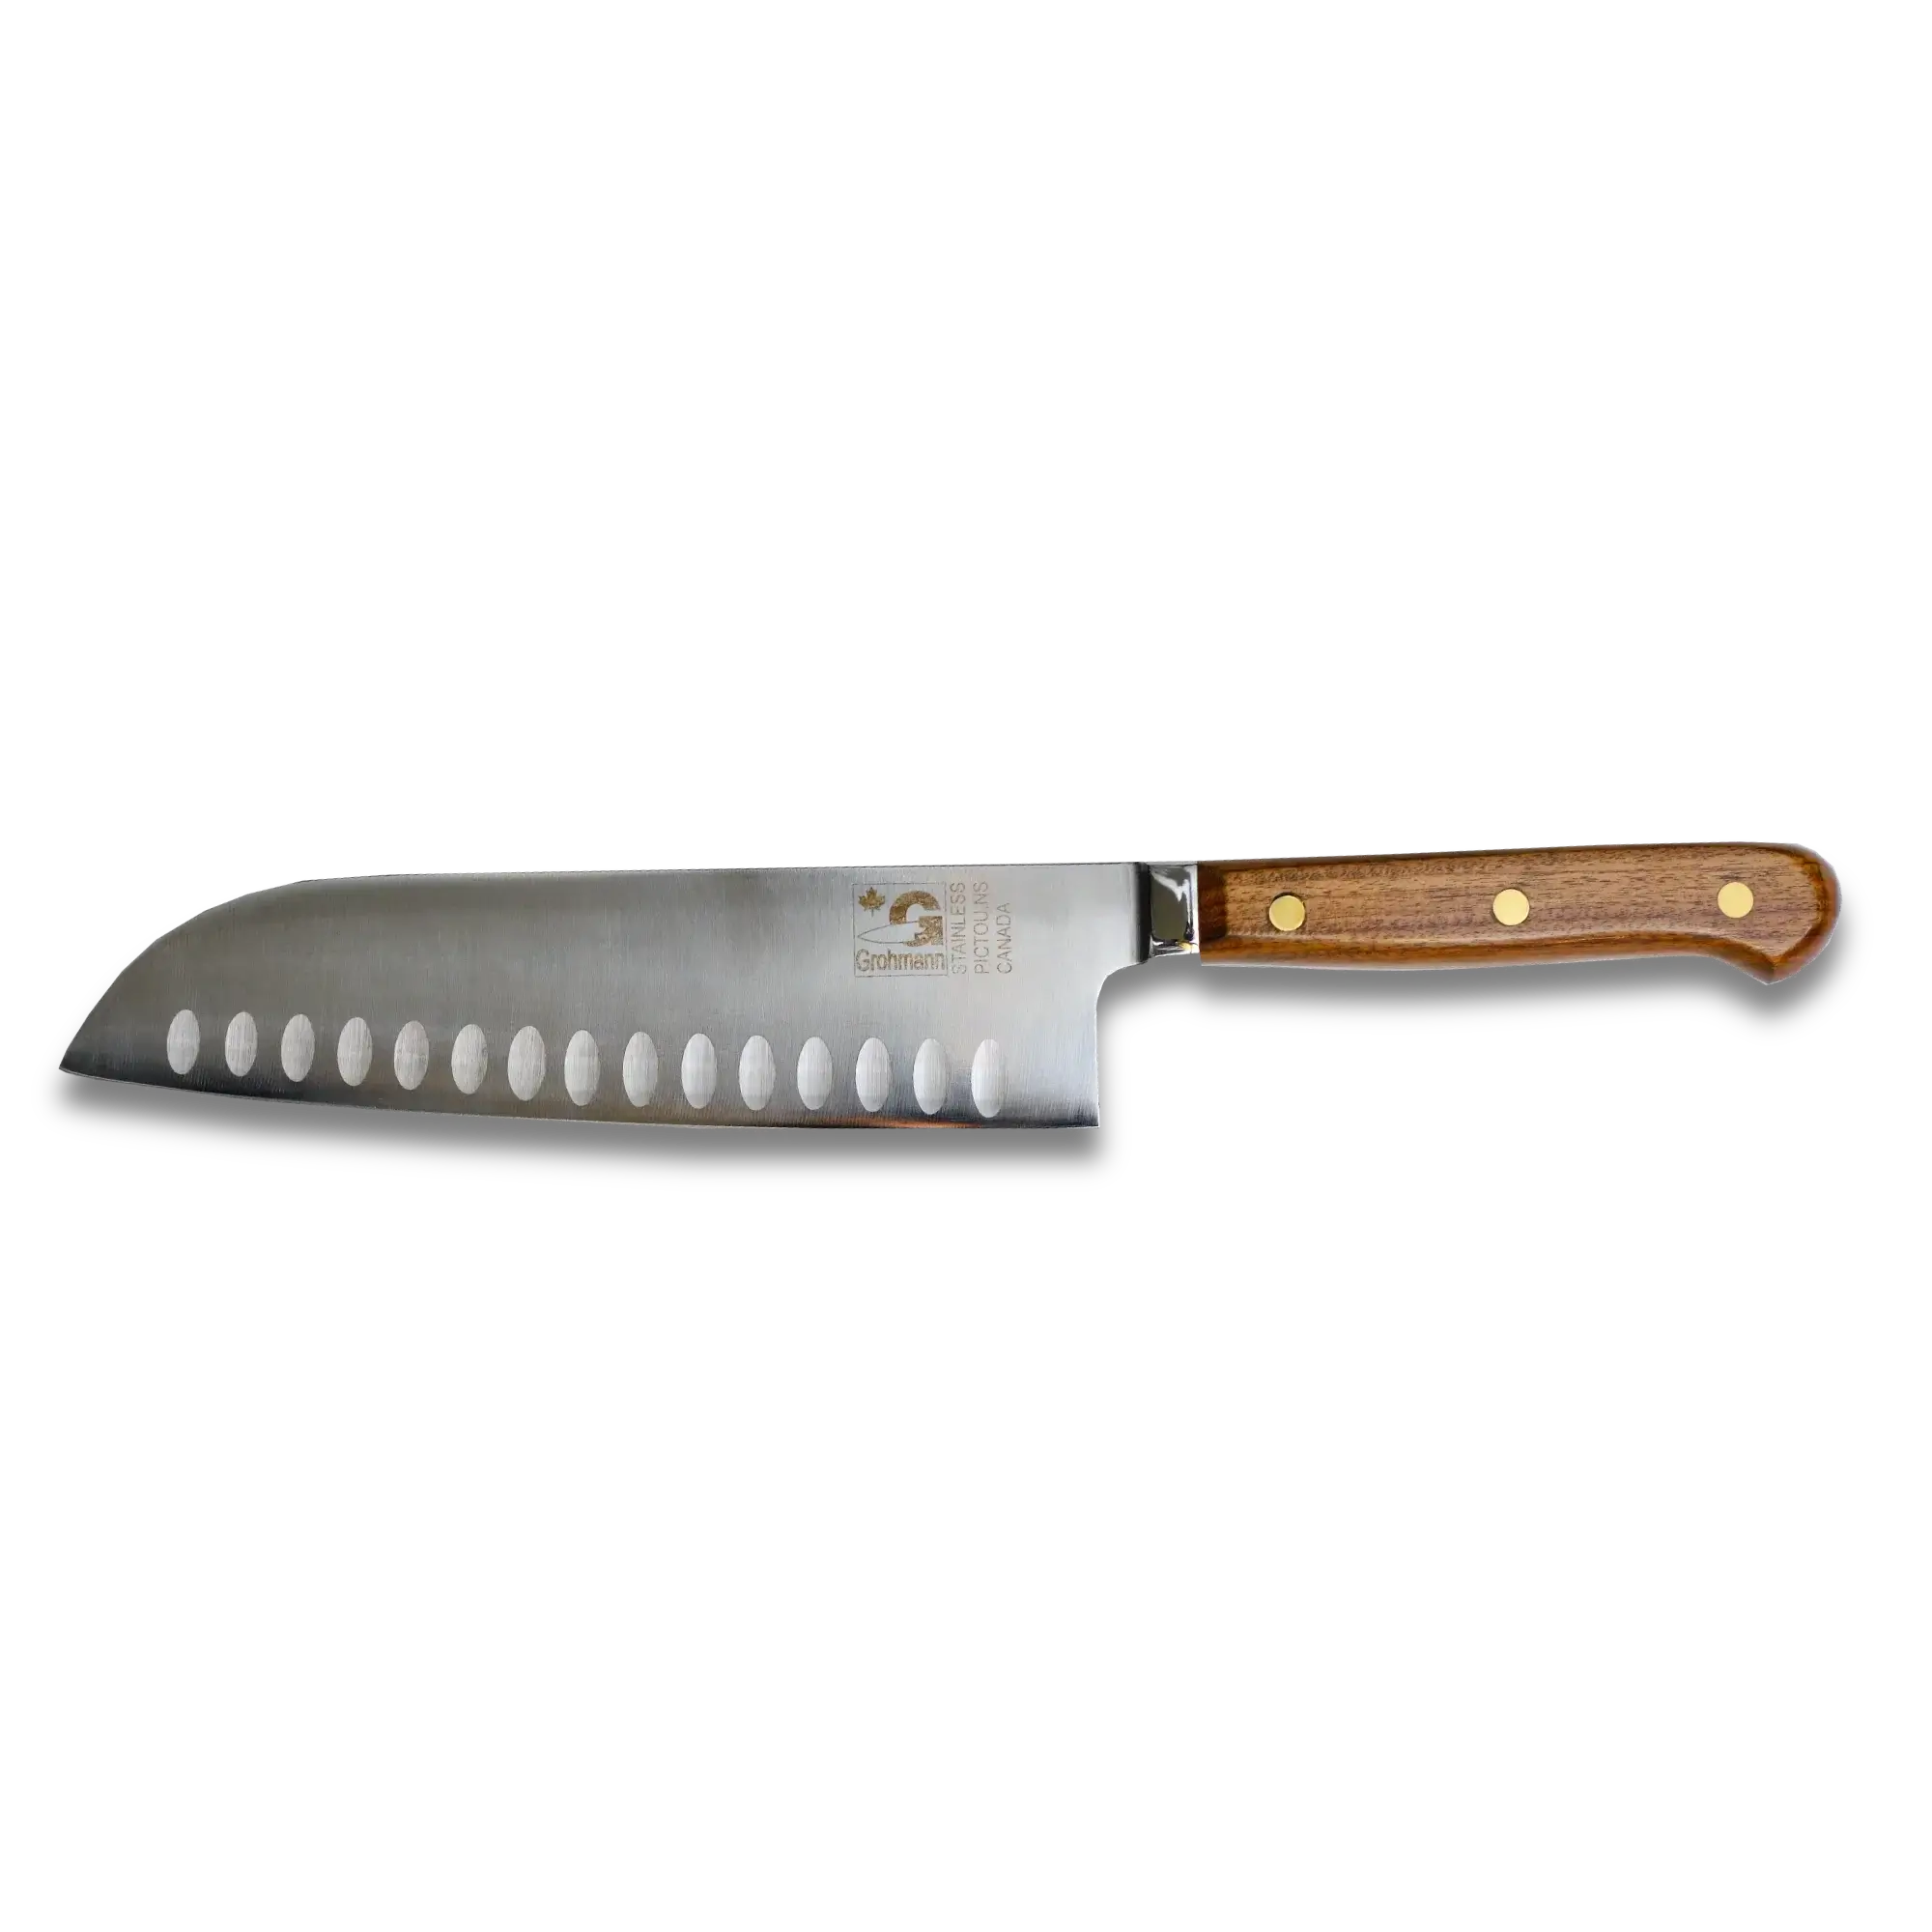 Grohmann Forged Heavy- Santoku Knive 7" Forged Steel - #209FG-7